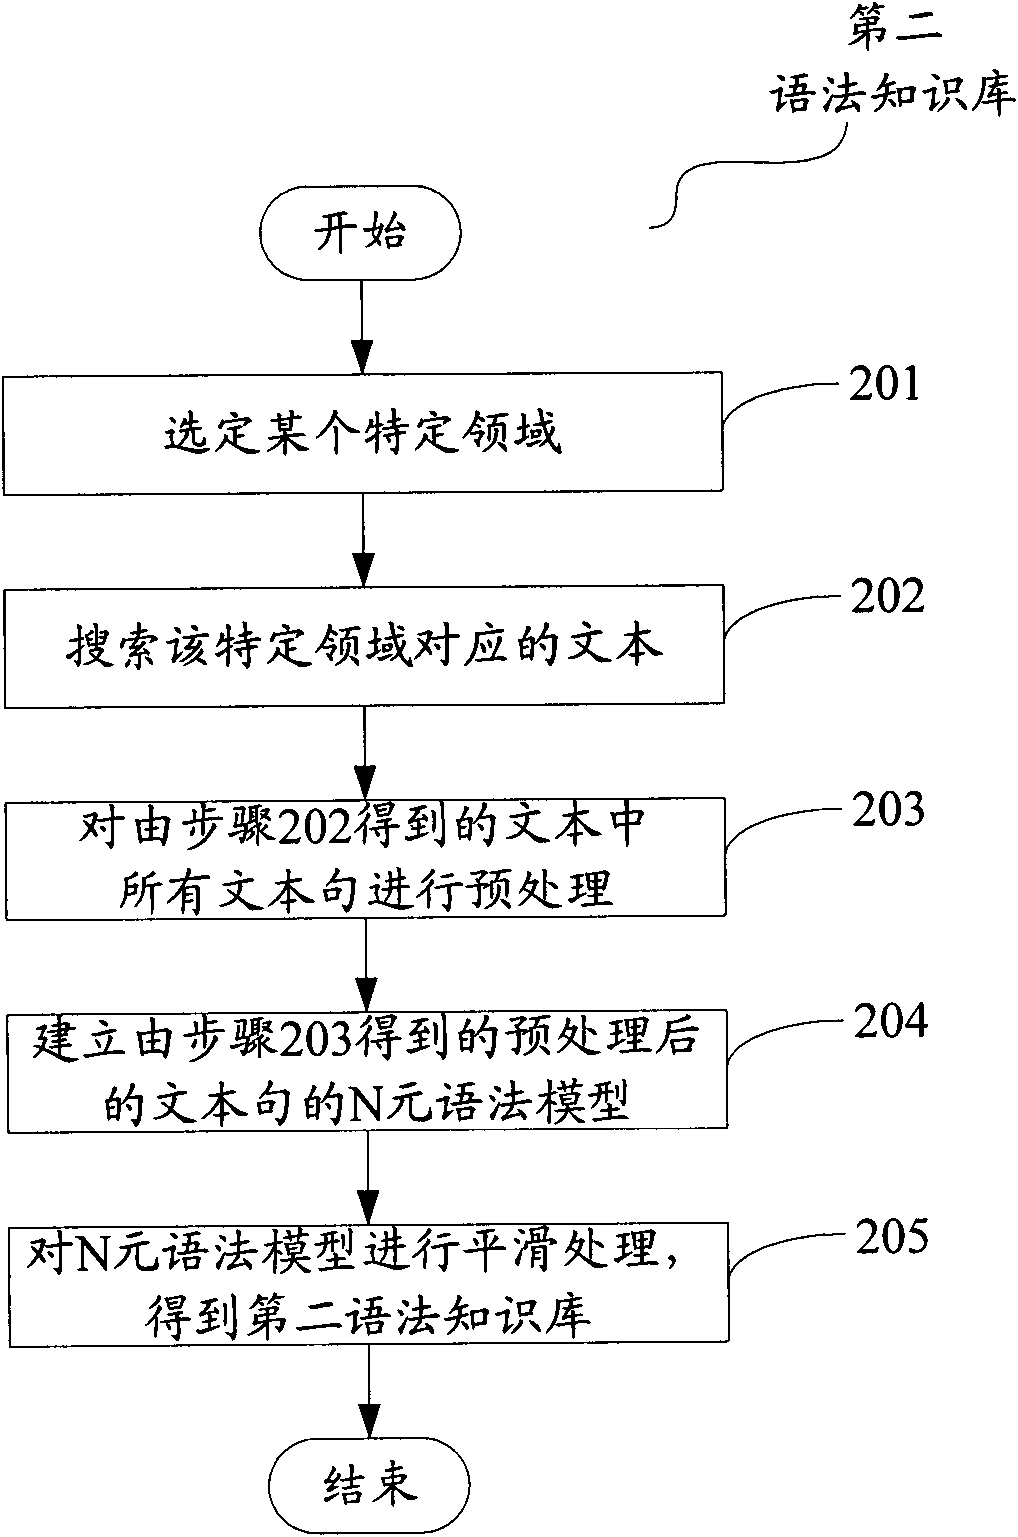 Method for detecting and correcting error on text after voice recognition